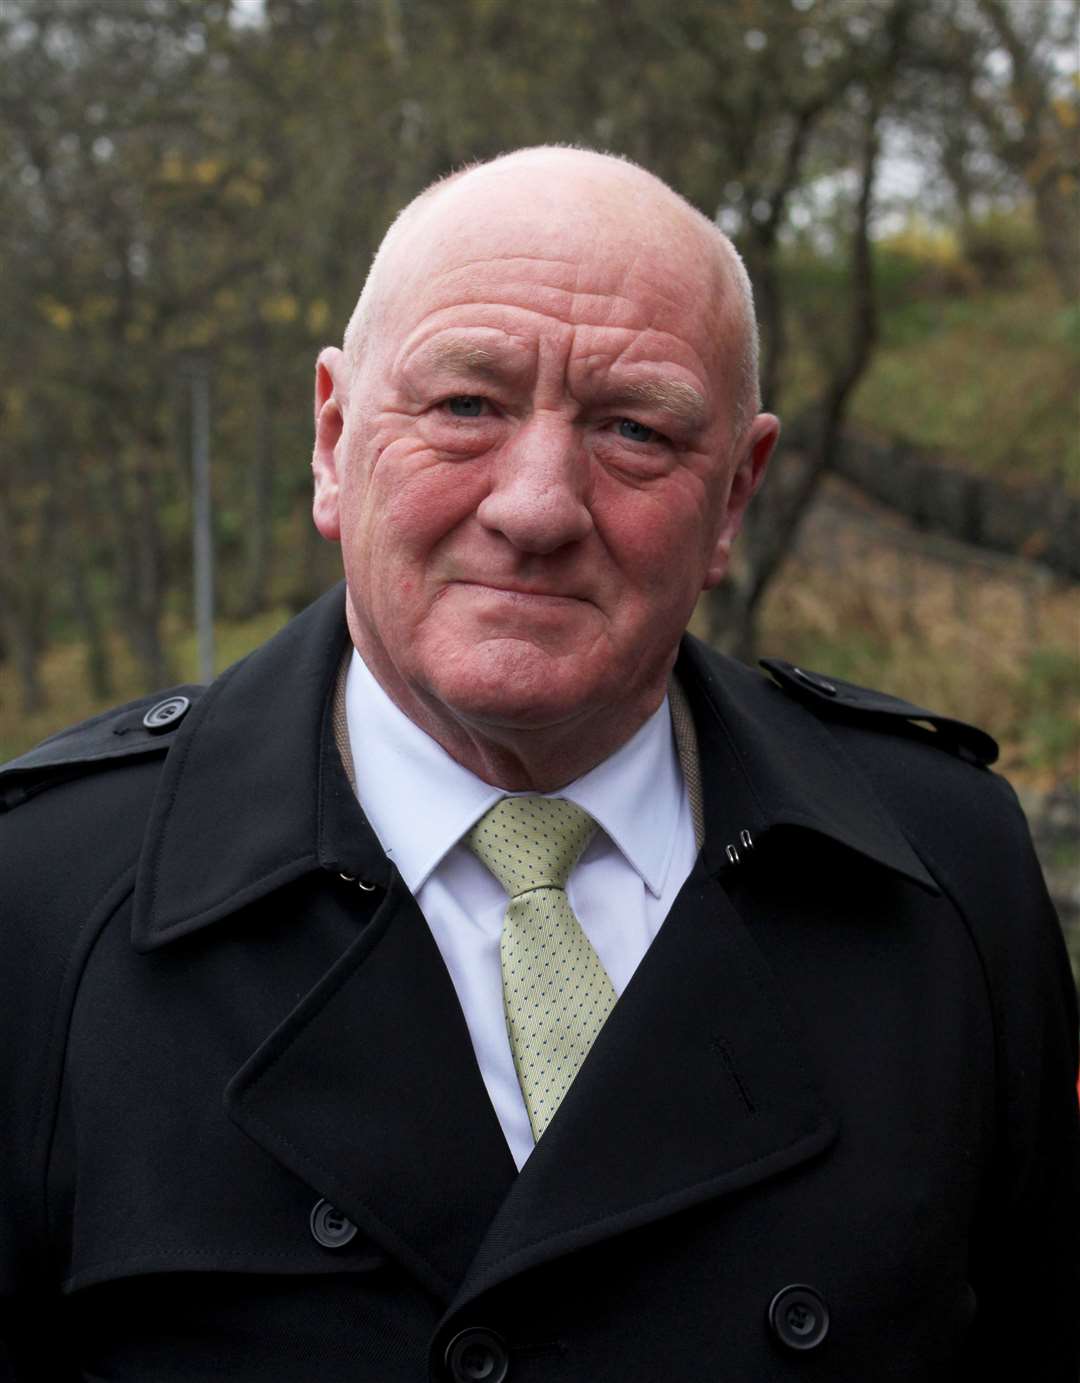 Iain Gregory, a retired senior police officer, is "deeply concerned" about the cuts